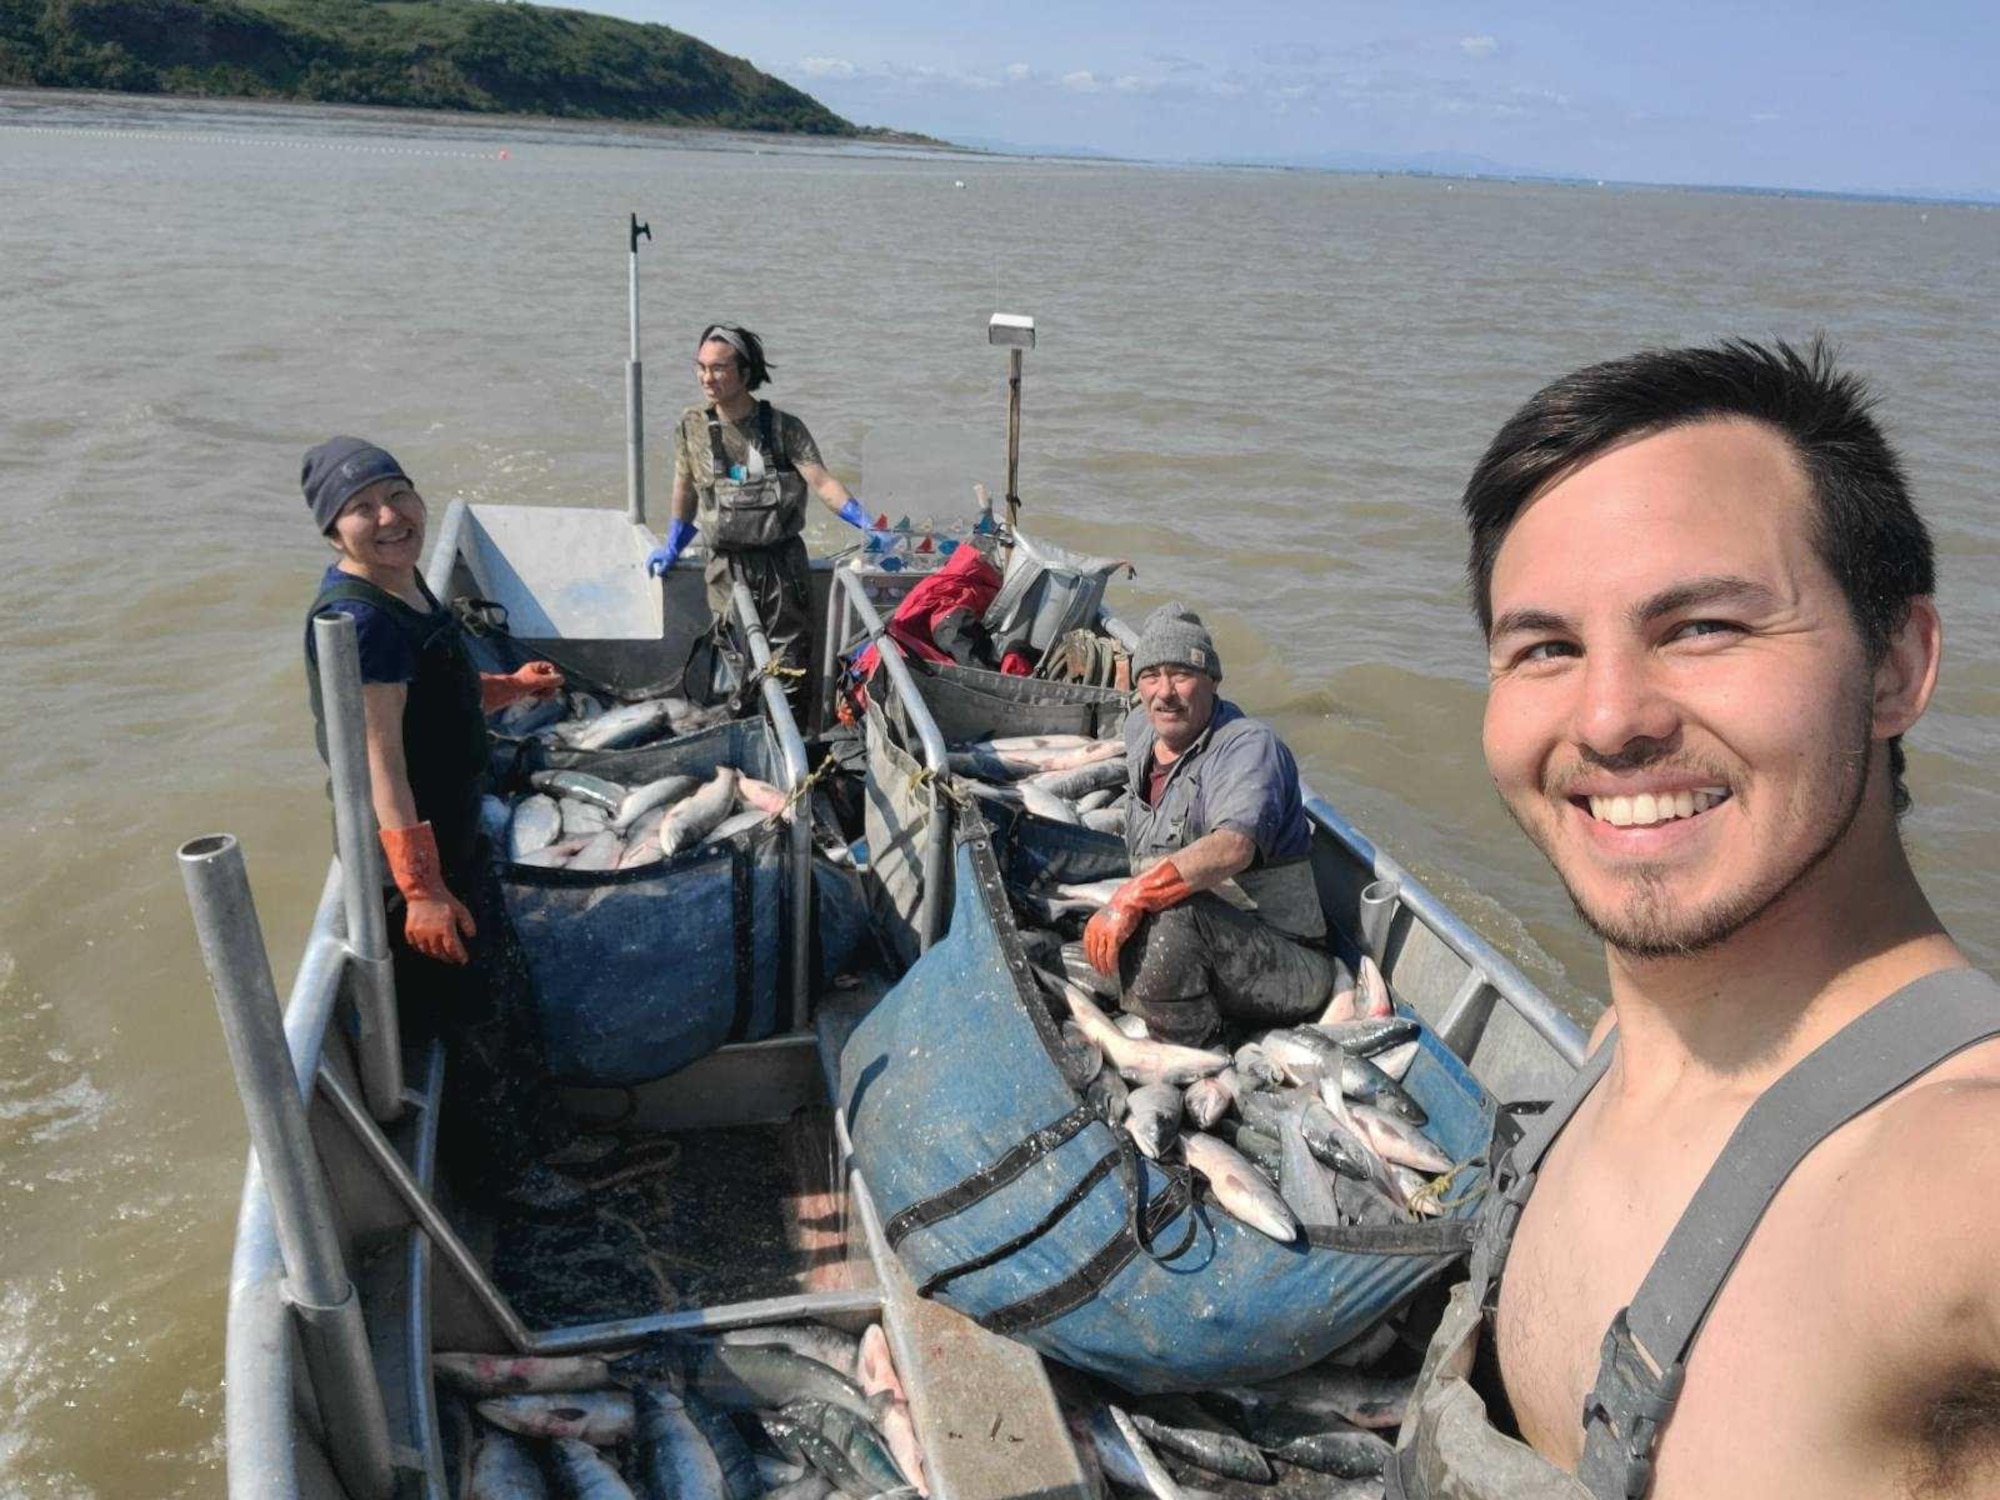 Staff Sgt. David Thurman, a crew chief with the 168th Wing, Alaska Air National Guard, and an Alaskan Commercial Fisherman, takes a selfie photo with his mother Oleaanna, brother Bobby, and Step Dad David while fishing in Alaska.